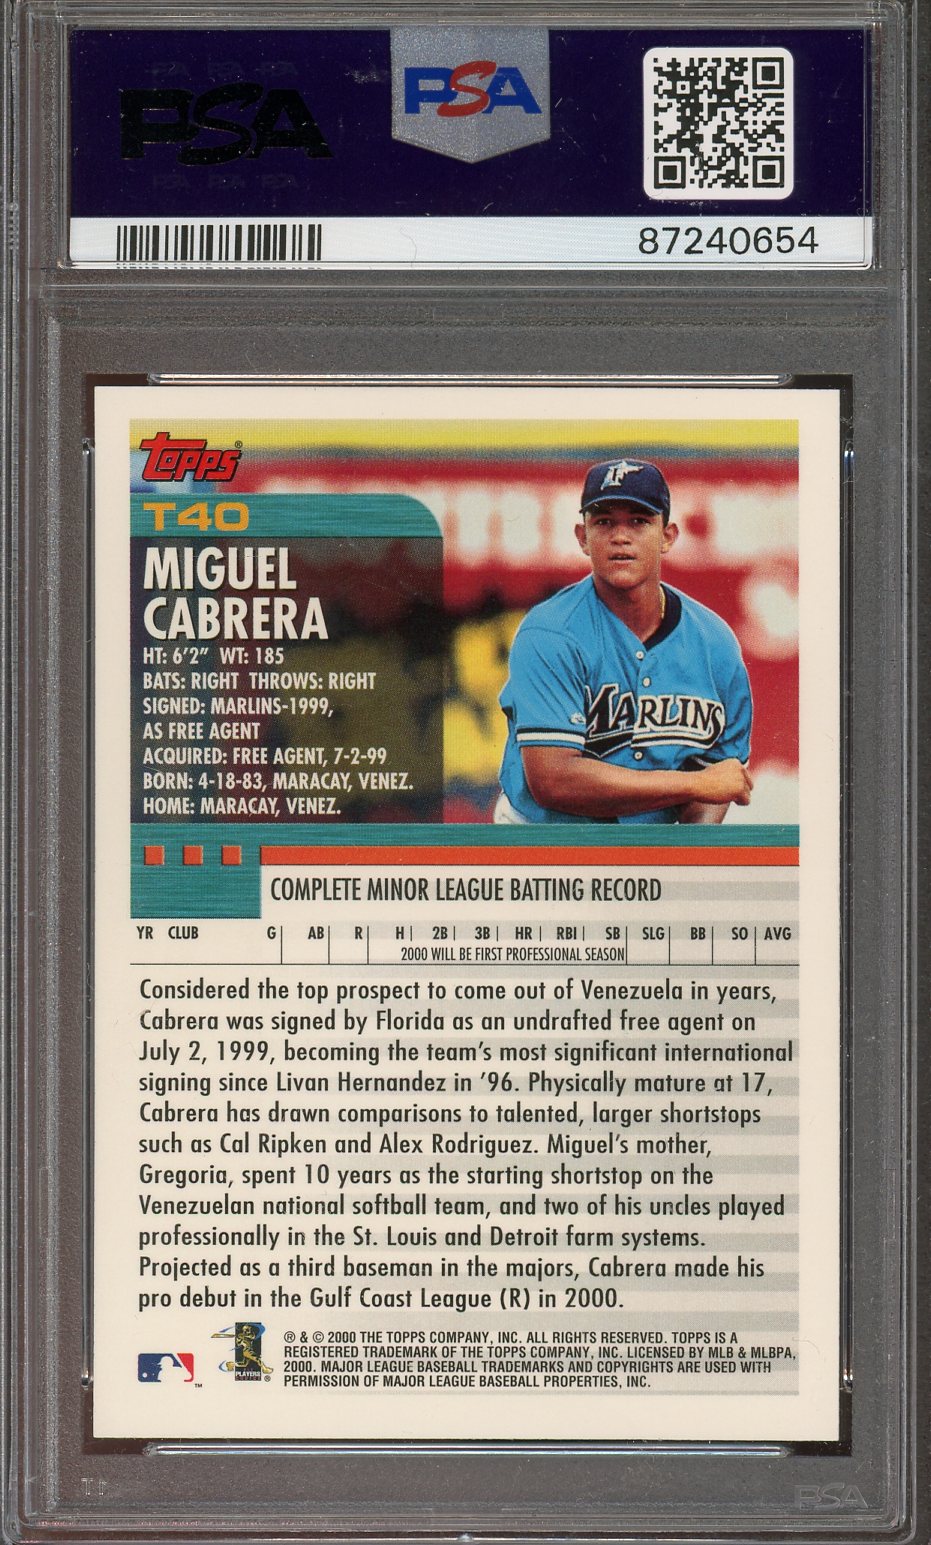 2000 Topps Traded Miguel Cabrera #T40 PSA 9 RC